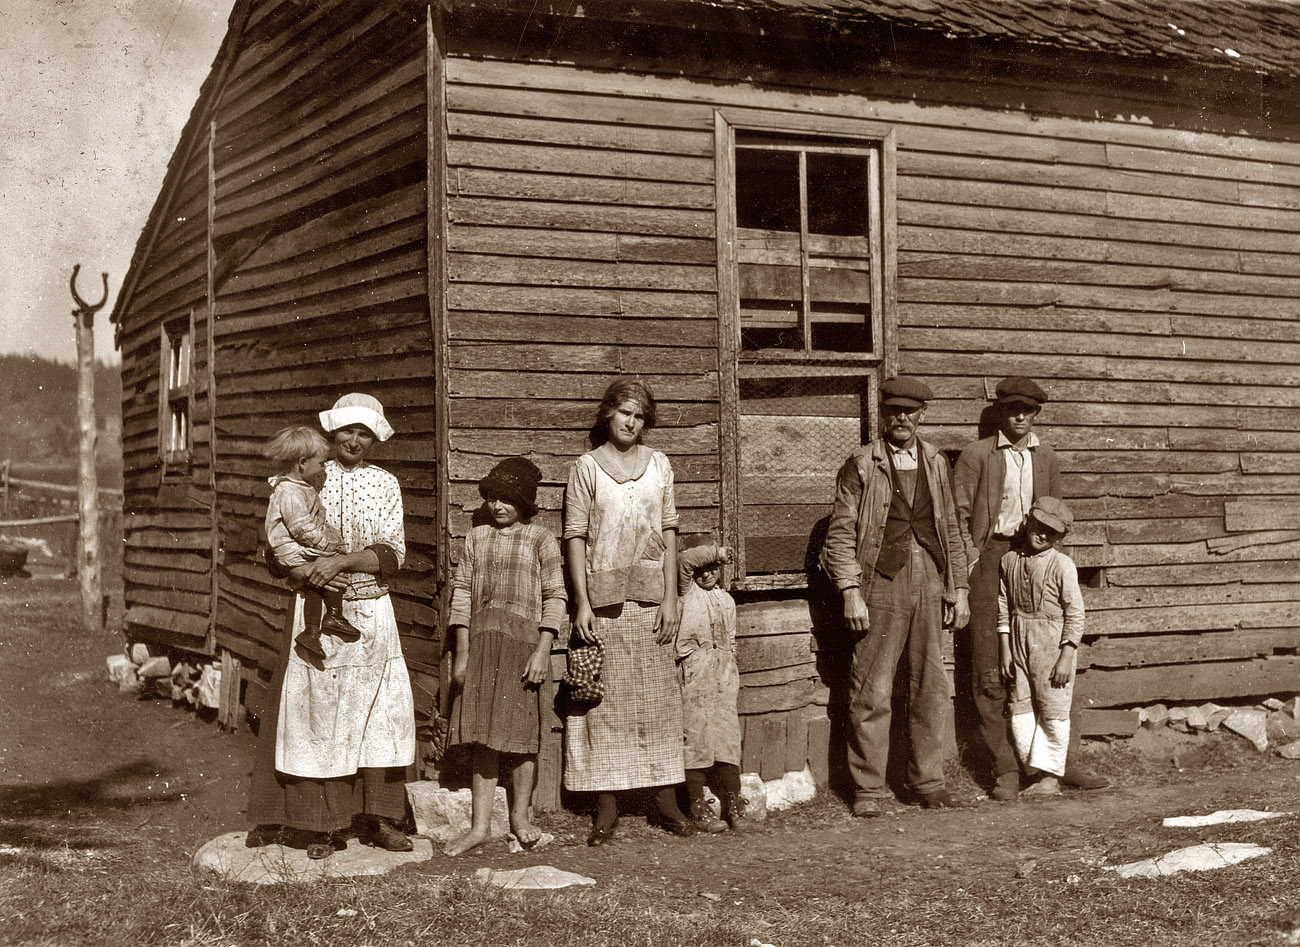 Nov. 10, 1916. Vicinity of Bowling Green, Kentucky. "Hazel family (very poorly educated). Children have not been to school this year although living within 1½ miles of school." View full size. Photograph and caption by Lewis Wickes Hine.